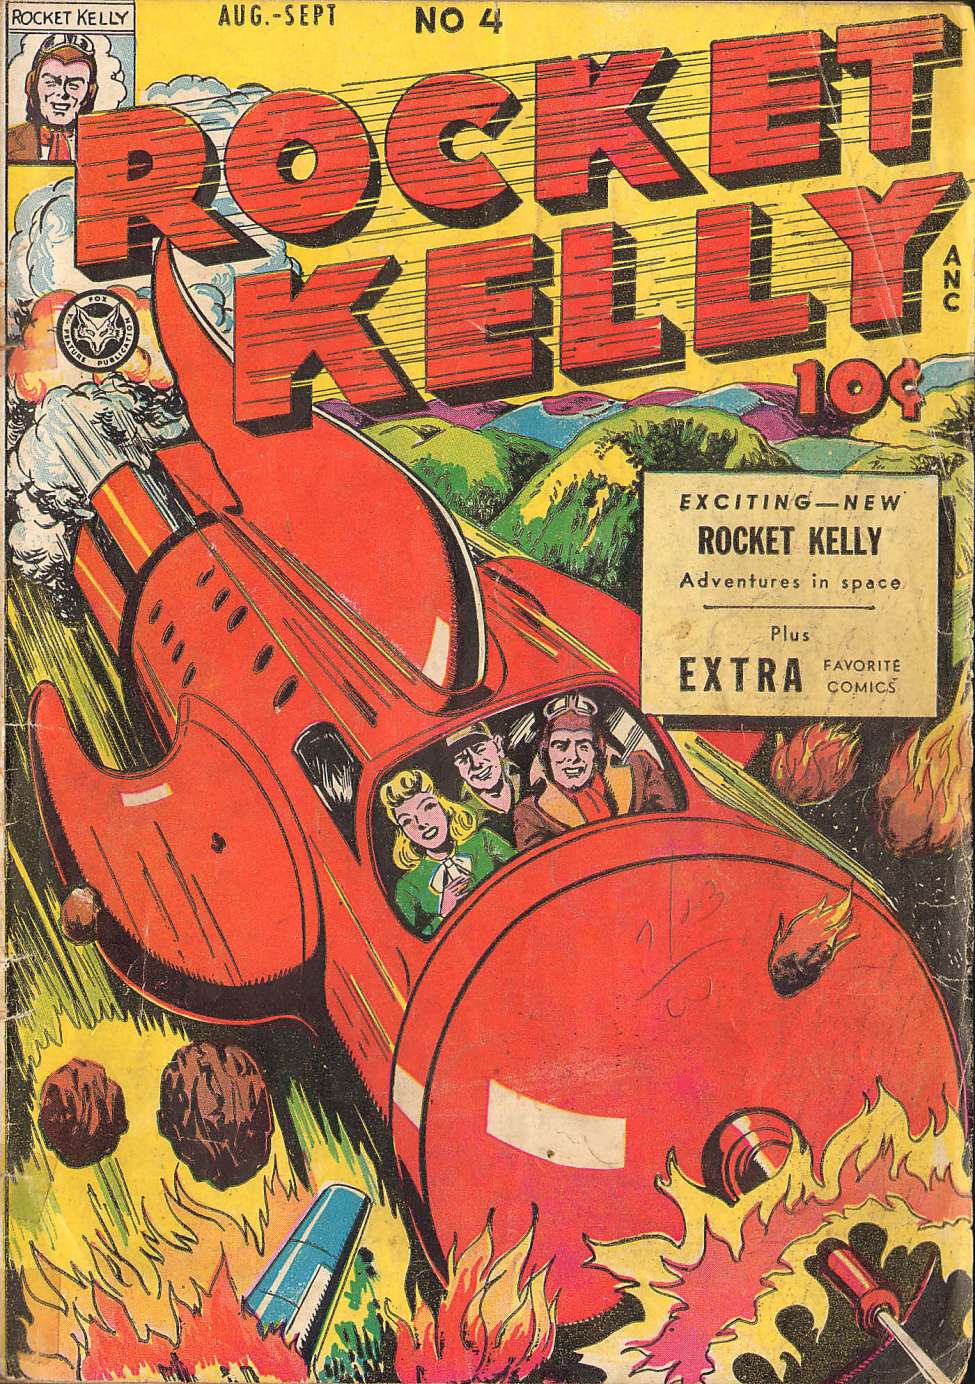 Rocket Kelly 4 (Fox Feature Syndicate) - Comic Book Plus